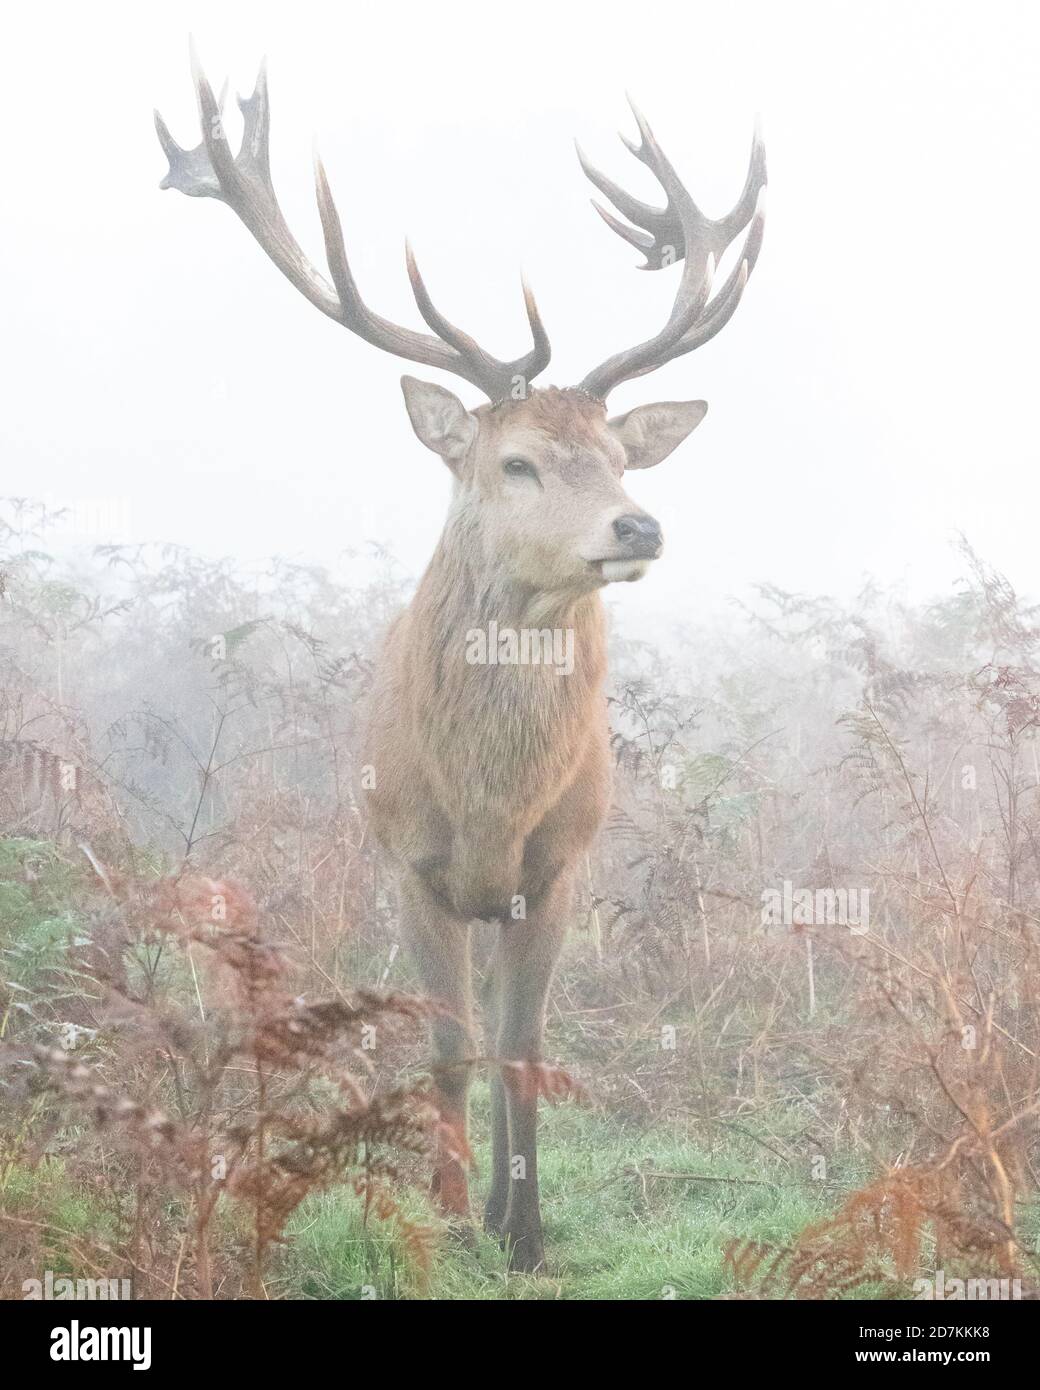 A red deer stag stands arrogantly in the early morning mist of learly Autumn, in Bushy Park, West London Stock Photo